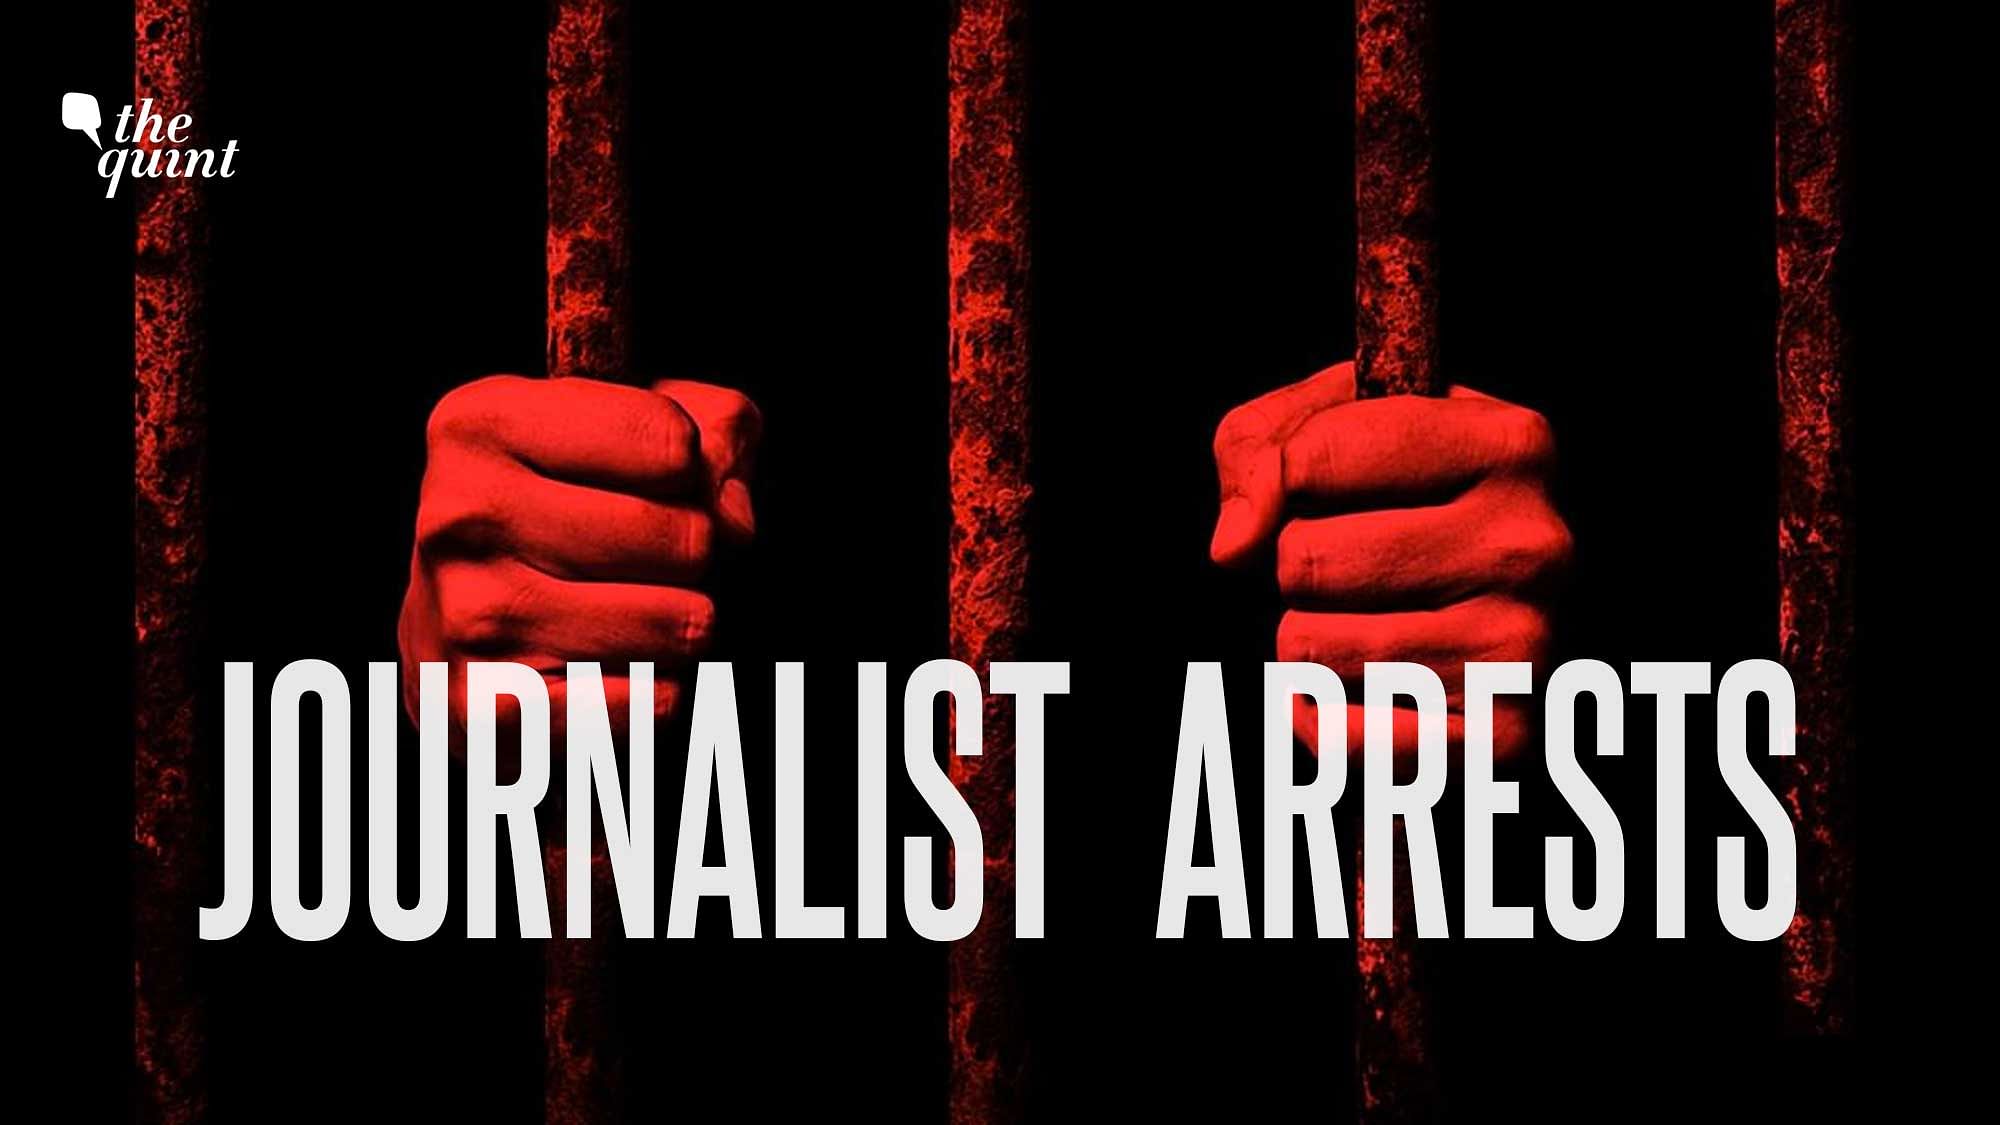 2020 saw a record high in journalist arrests globally with 274 journalist being imprisoned in relation to their work. 